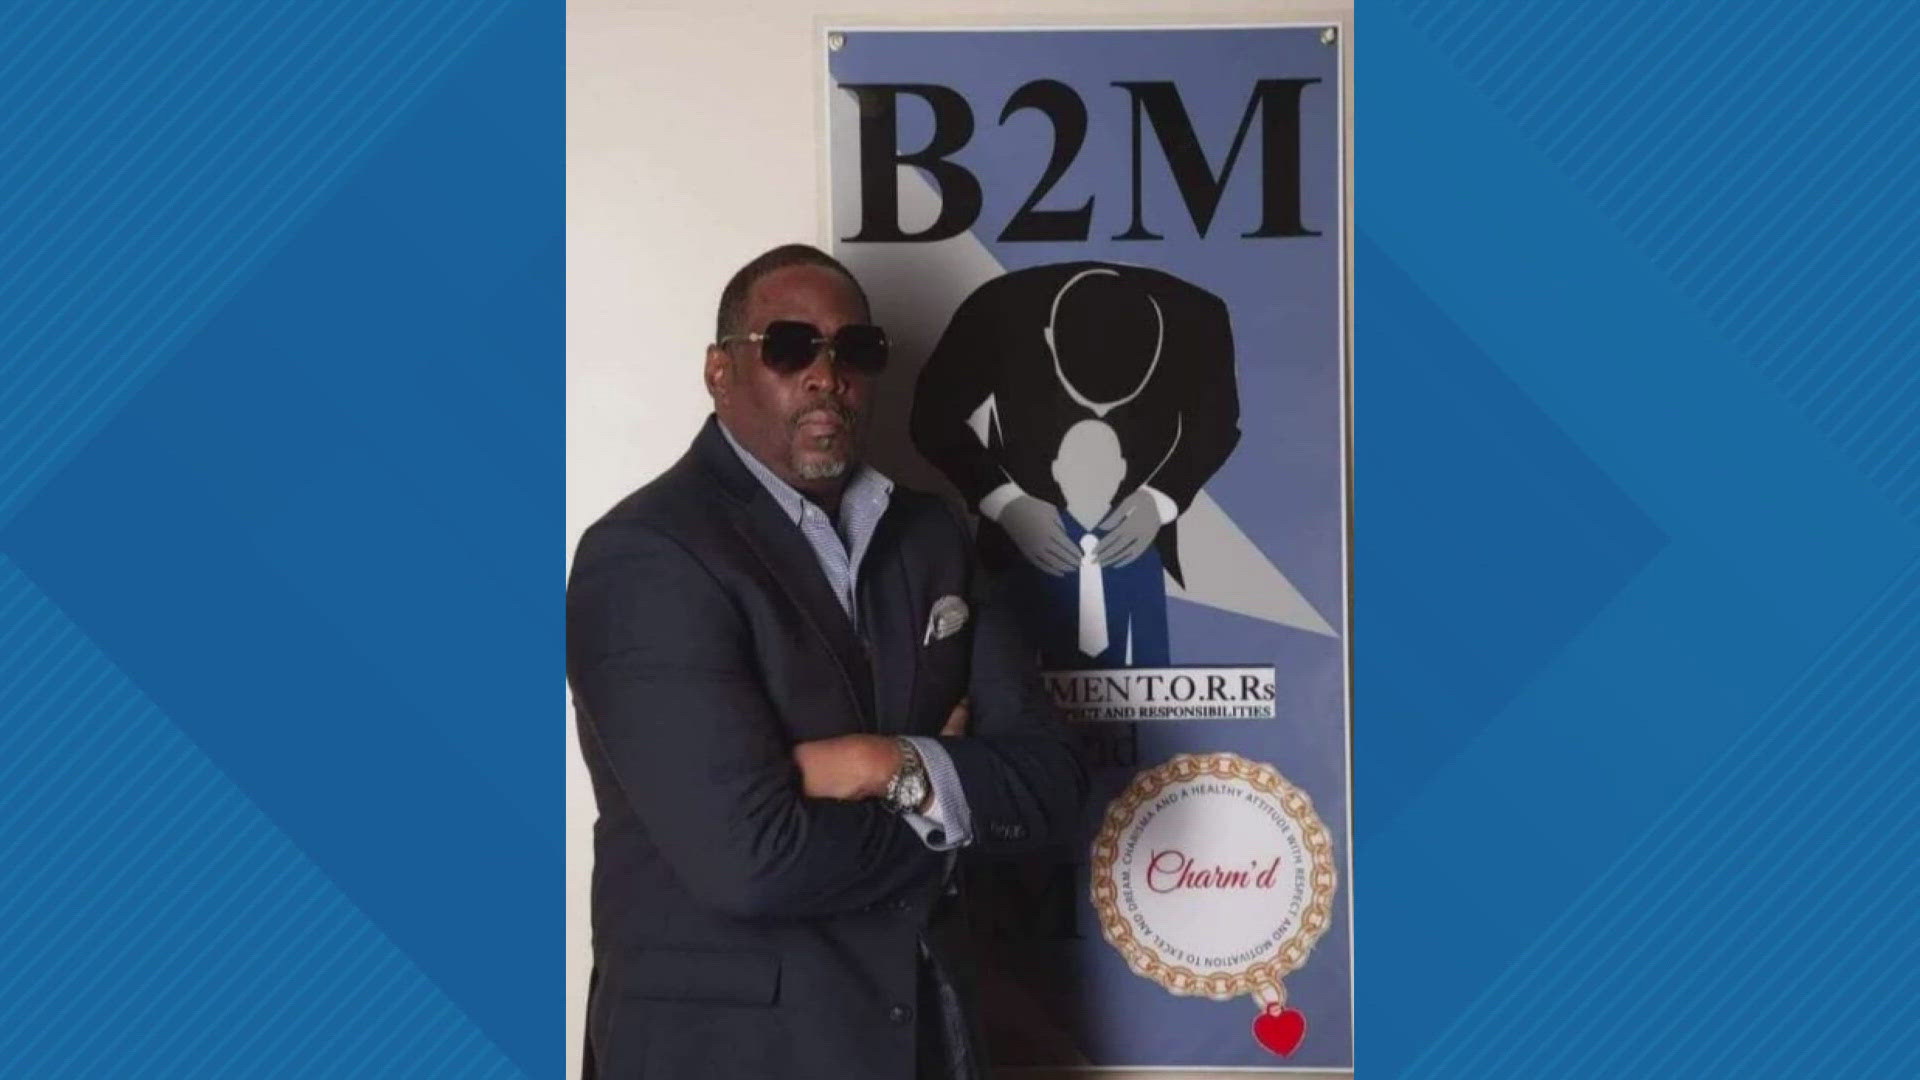 The St. Louis community is mourning the sudden death of a man who devoted his life to mentoring young boys. Duane Tolen was one of the Co-Founders of Boys2Mentorrs.